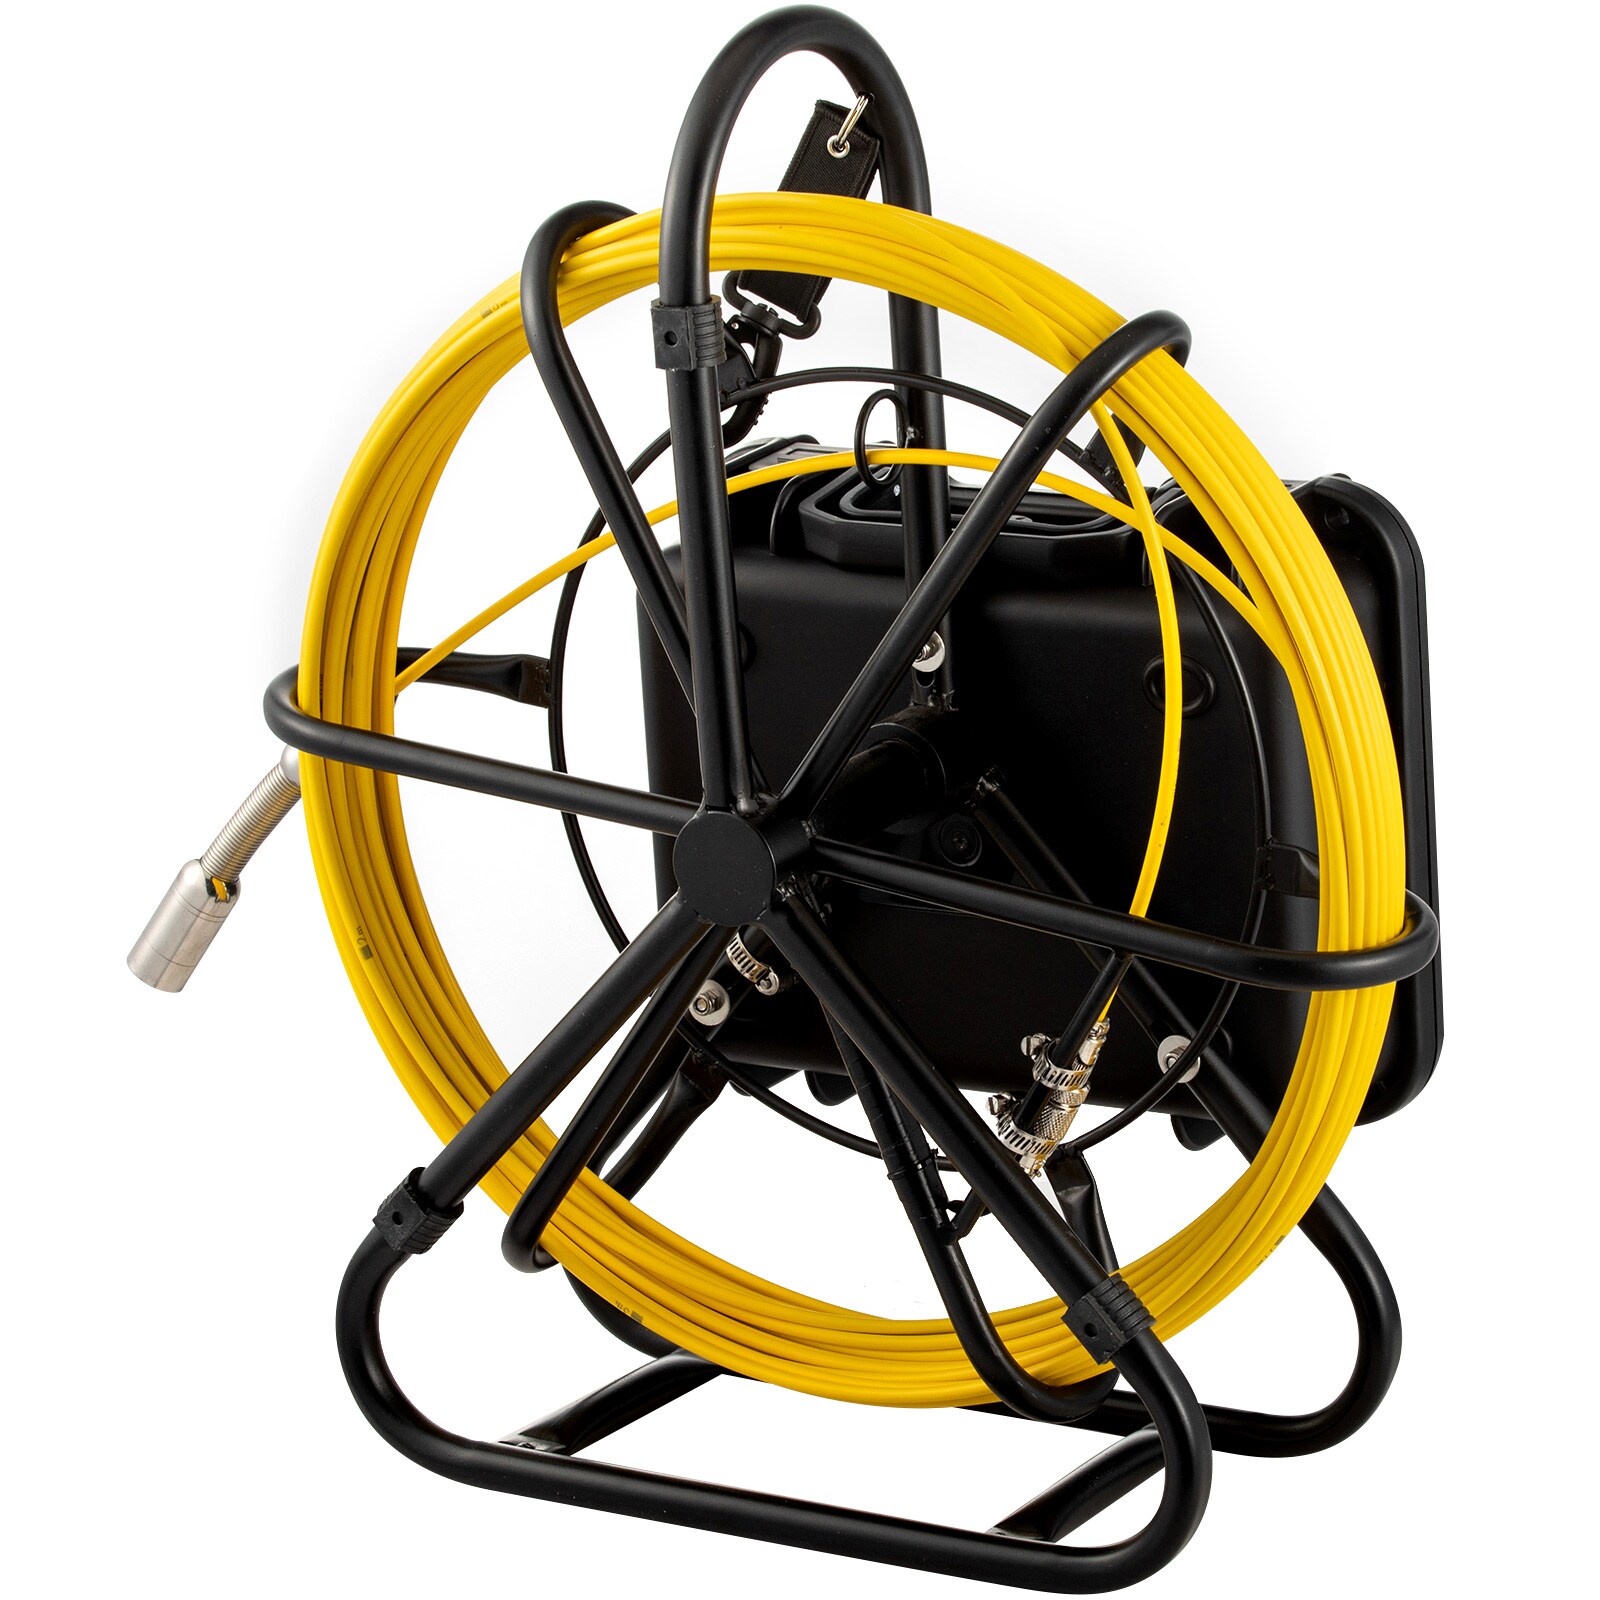 BUYISI 50 Ft Pipe Inspection Camera Usb Endoscope Video Sewer